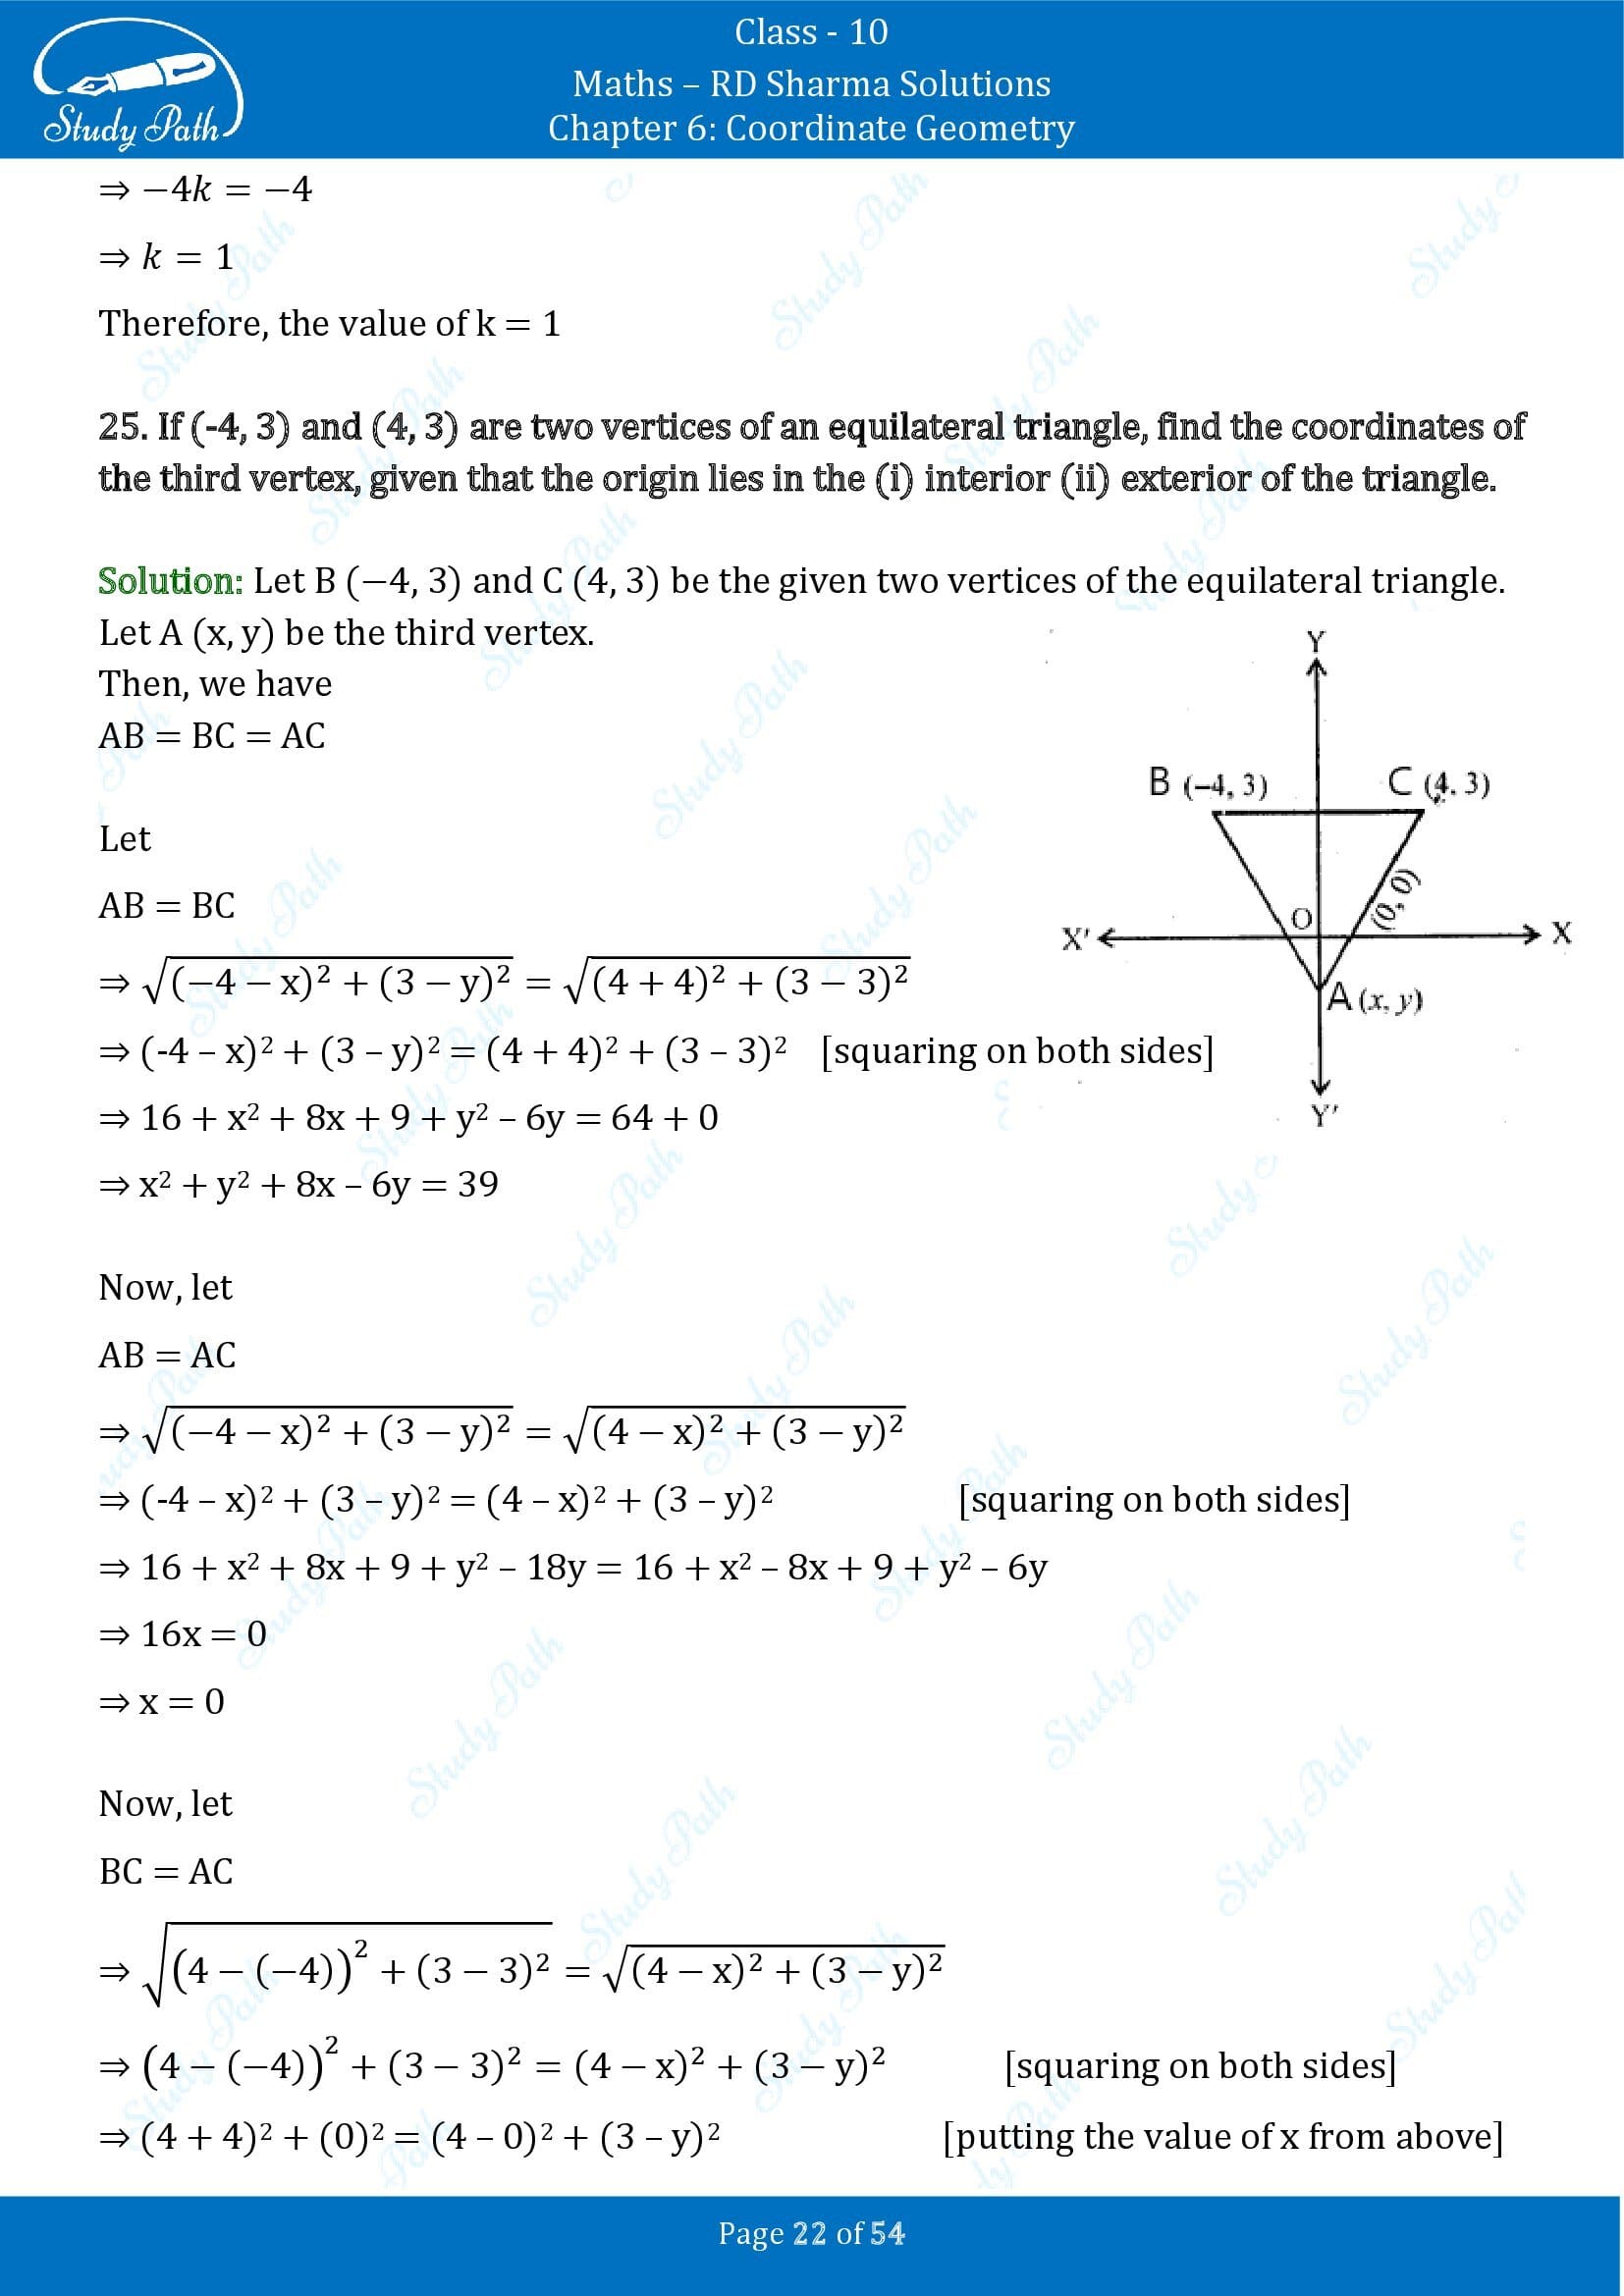 RD Sharma Solutions Class 10 Chapter 6 Coordinate Geometry Exercise 6.2 0022